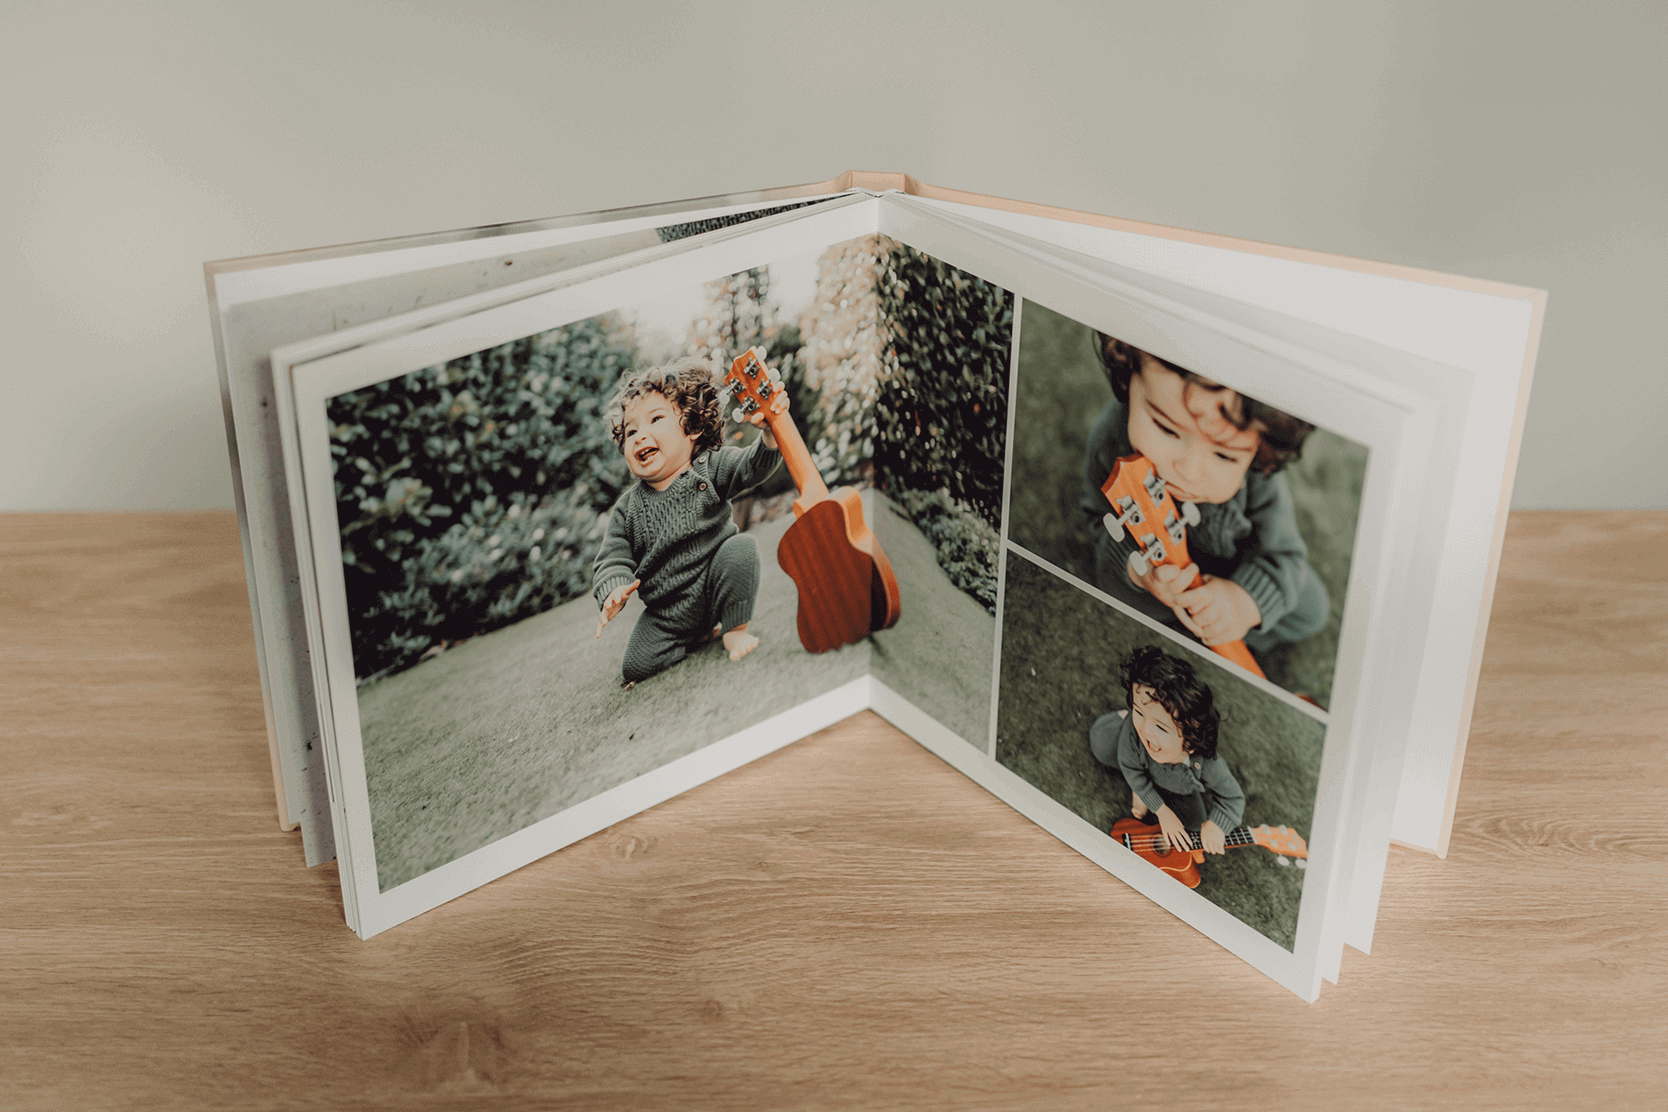 photoalbum open showing baby photos with a guitar